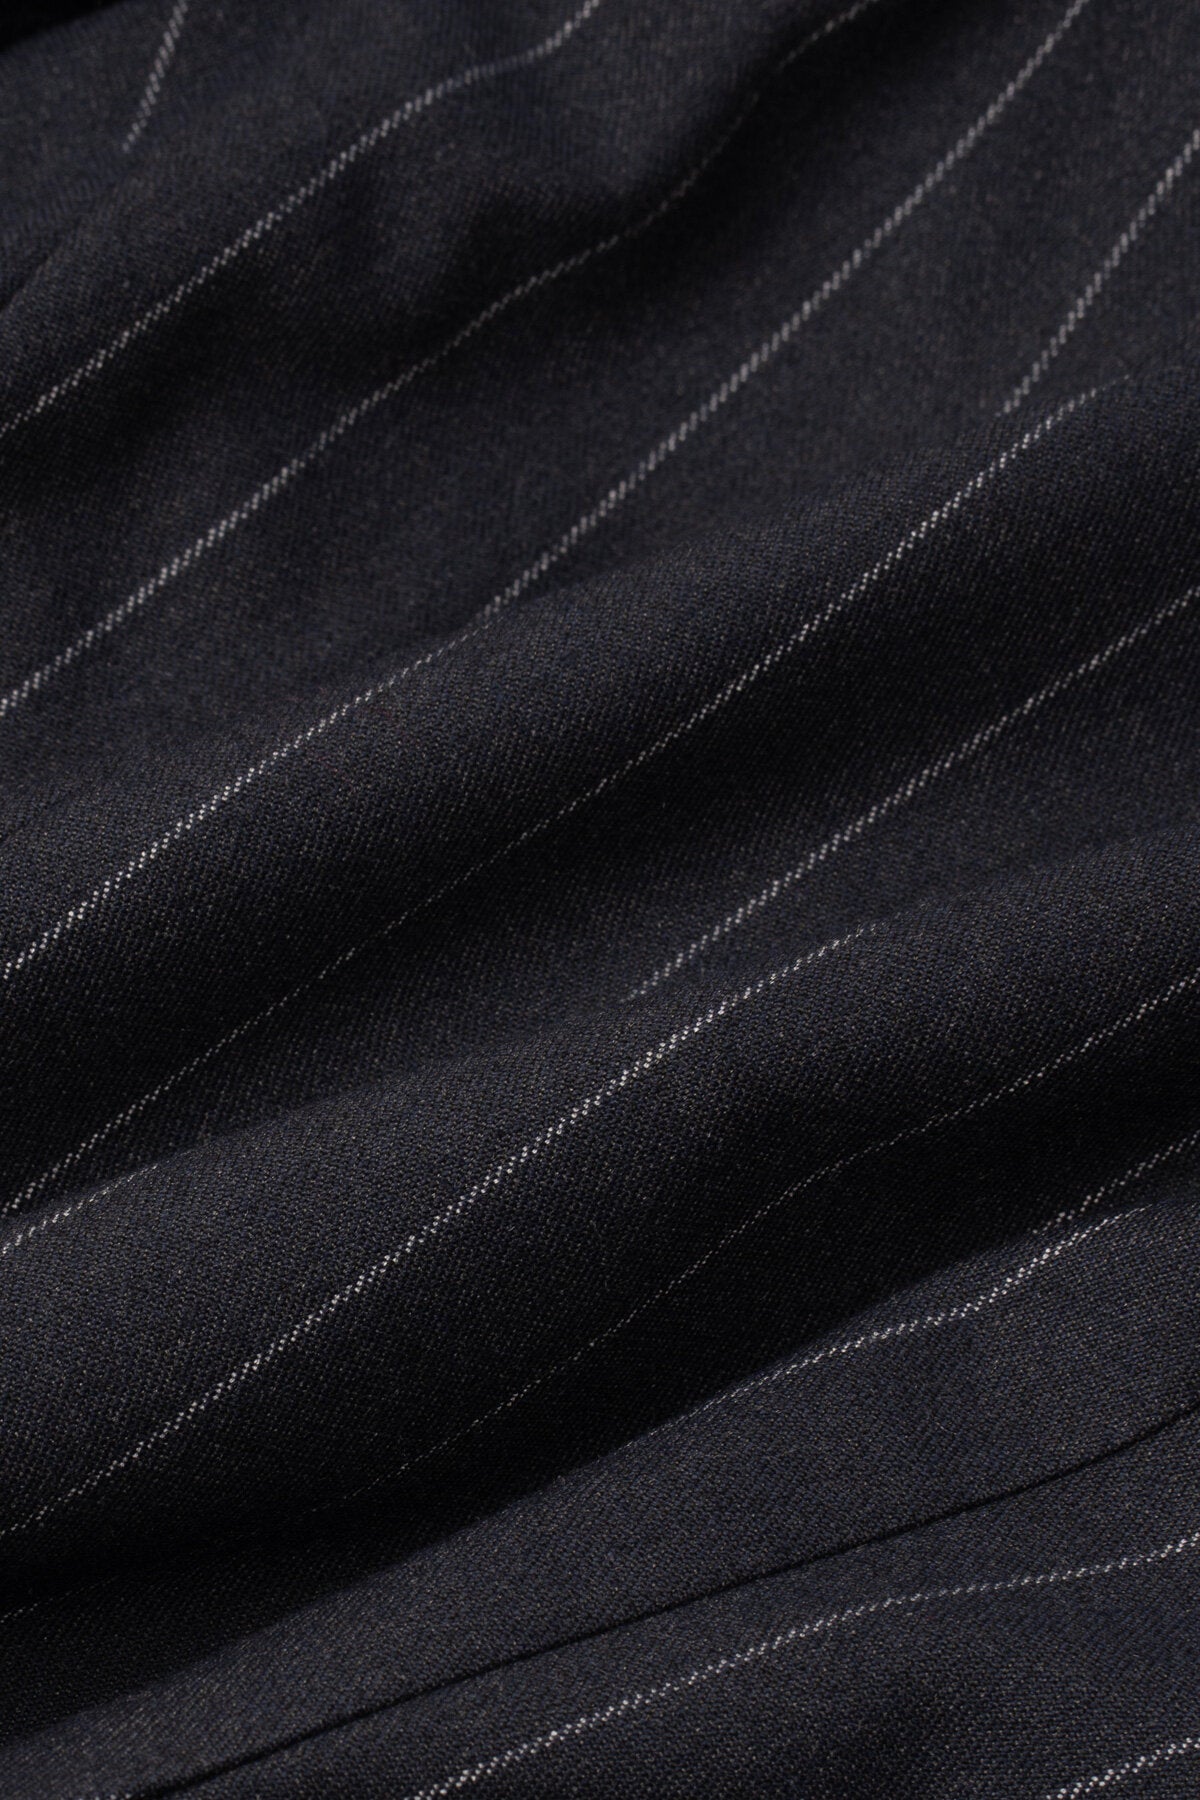 Invincible Navy Pinstripe Trousers - Trousers - 28R - Swagger & Swoon